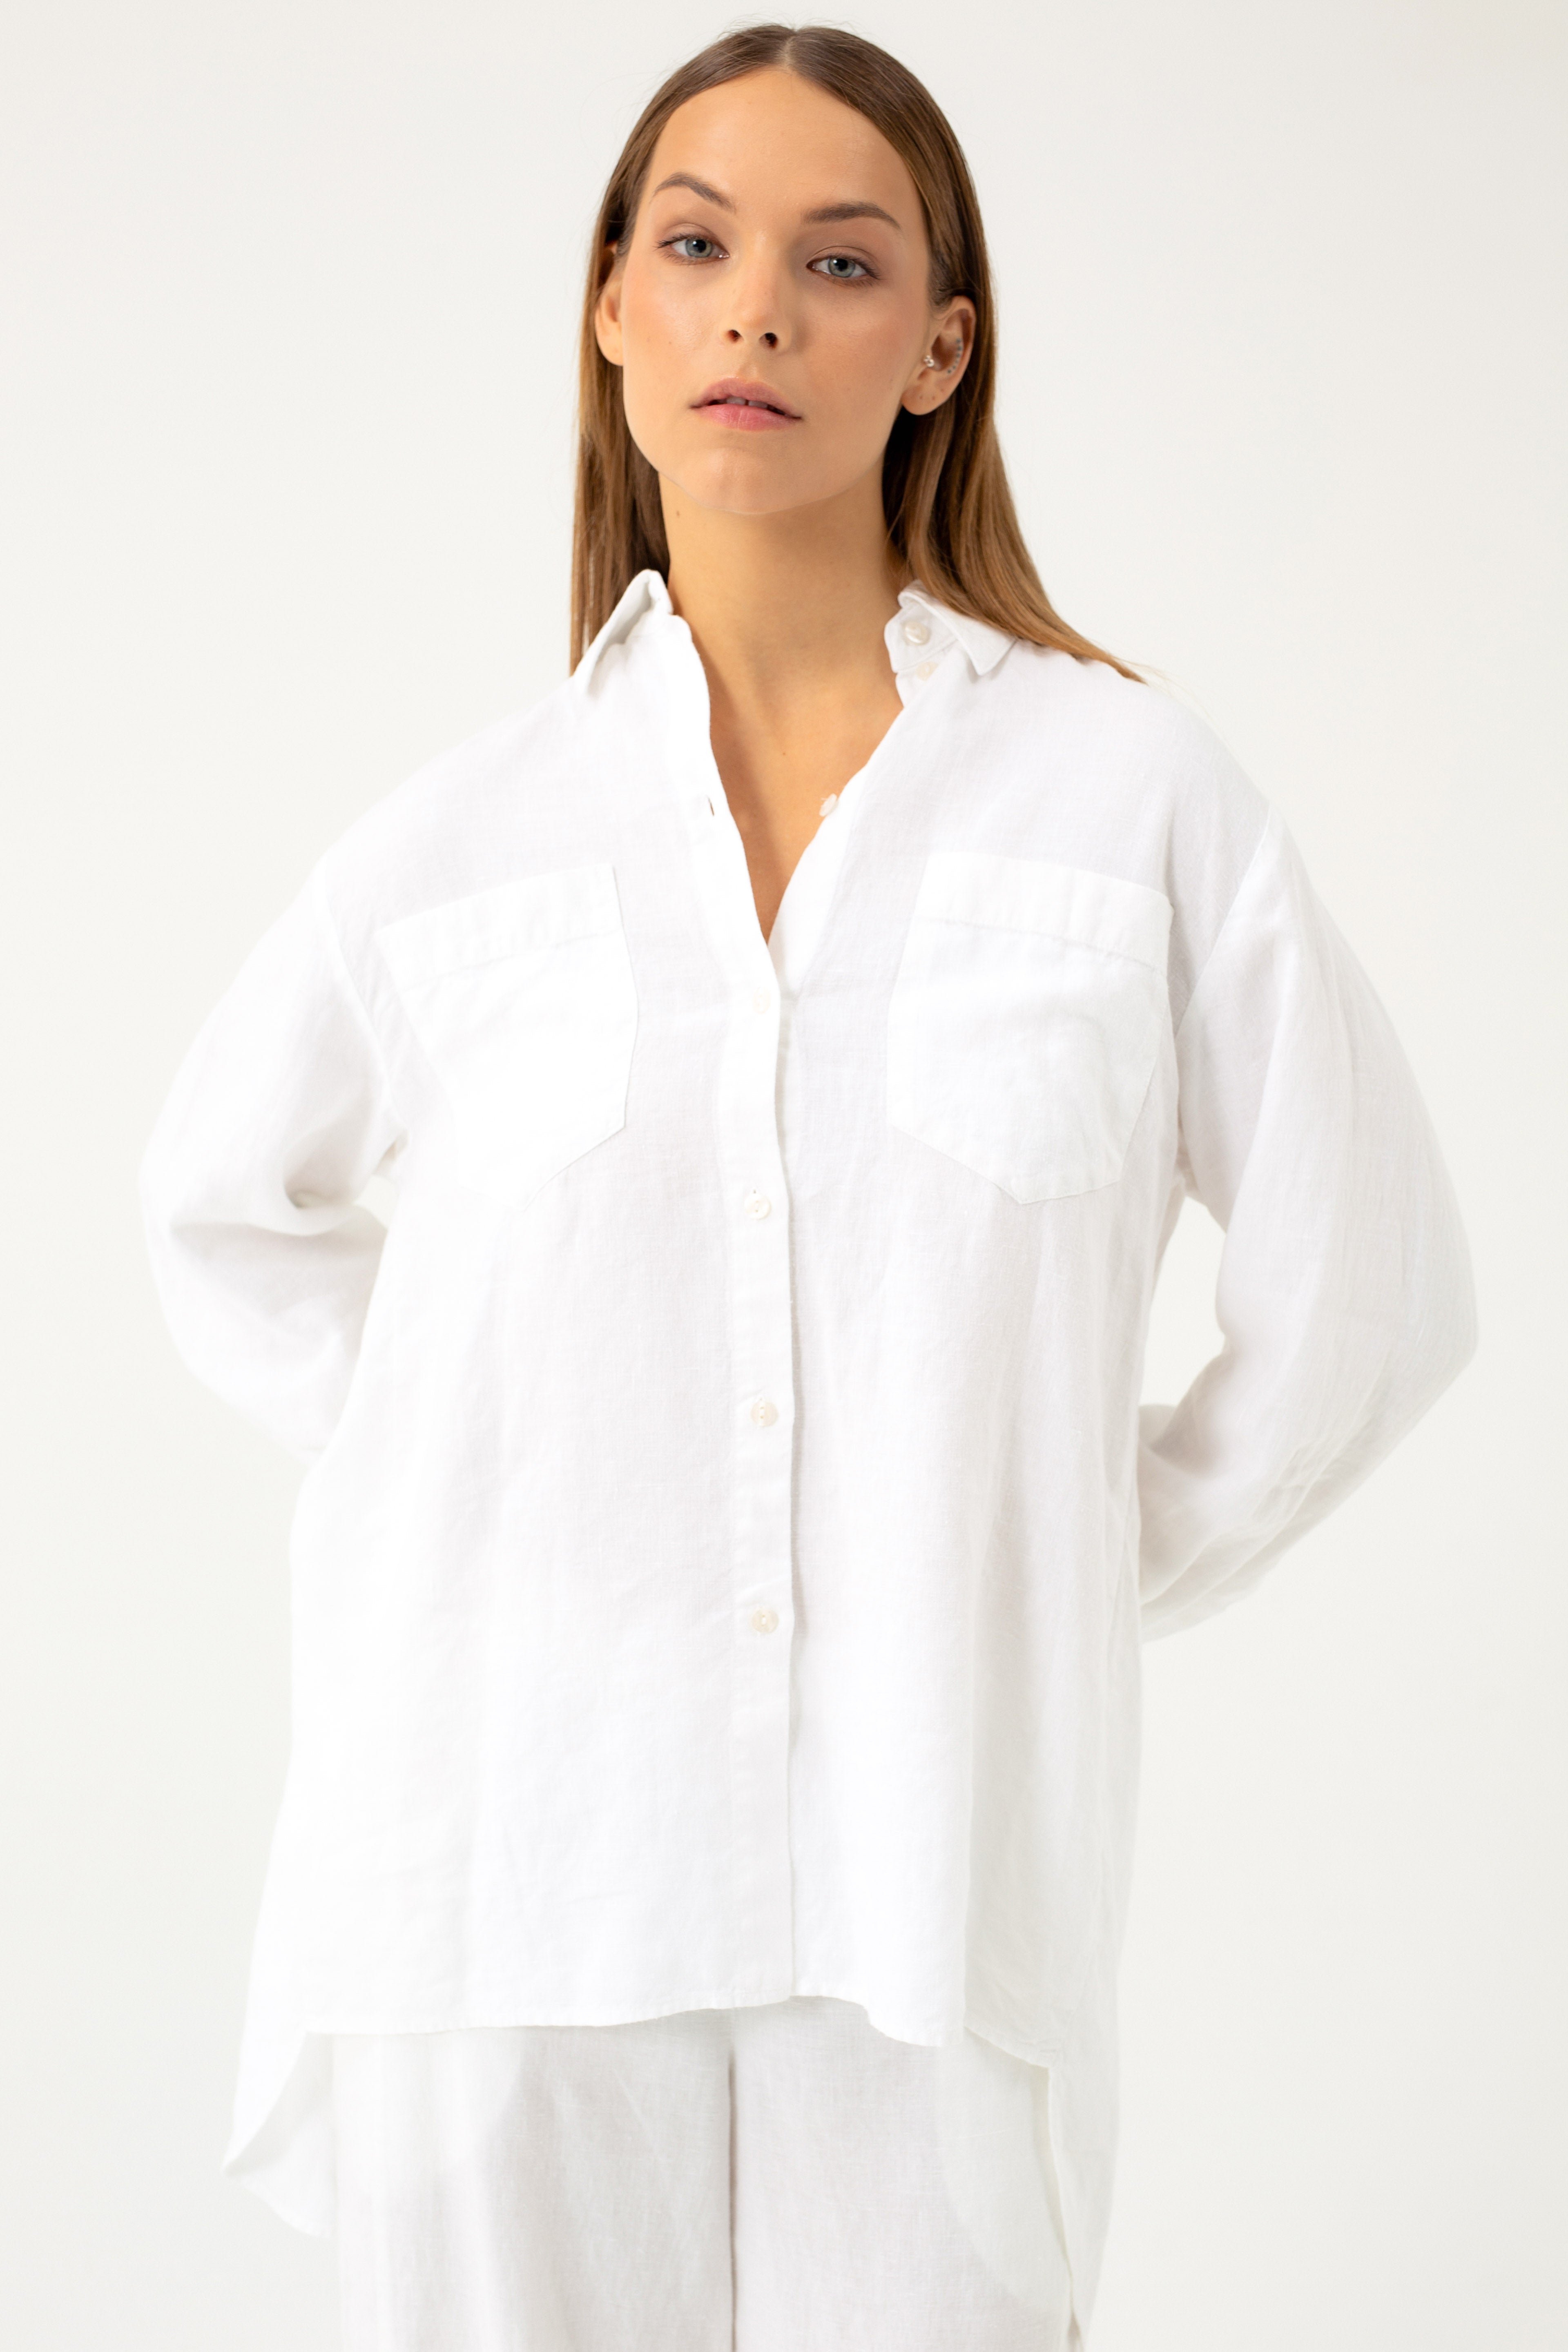 LINEN SHIRT WITH DIAGONAL SPLIT IN THE BACK